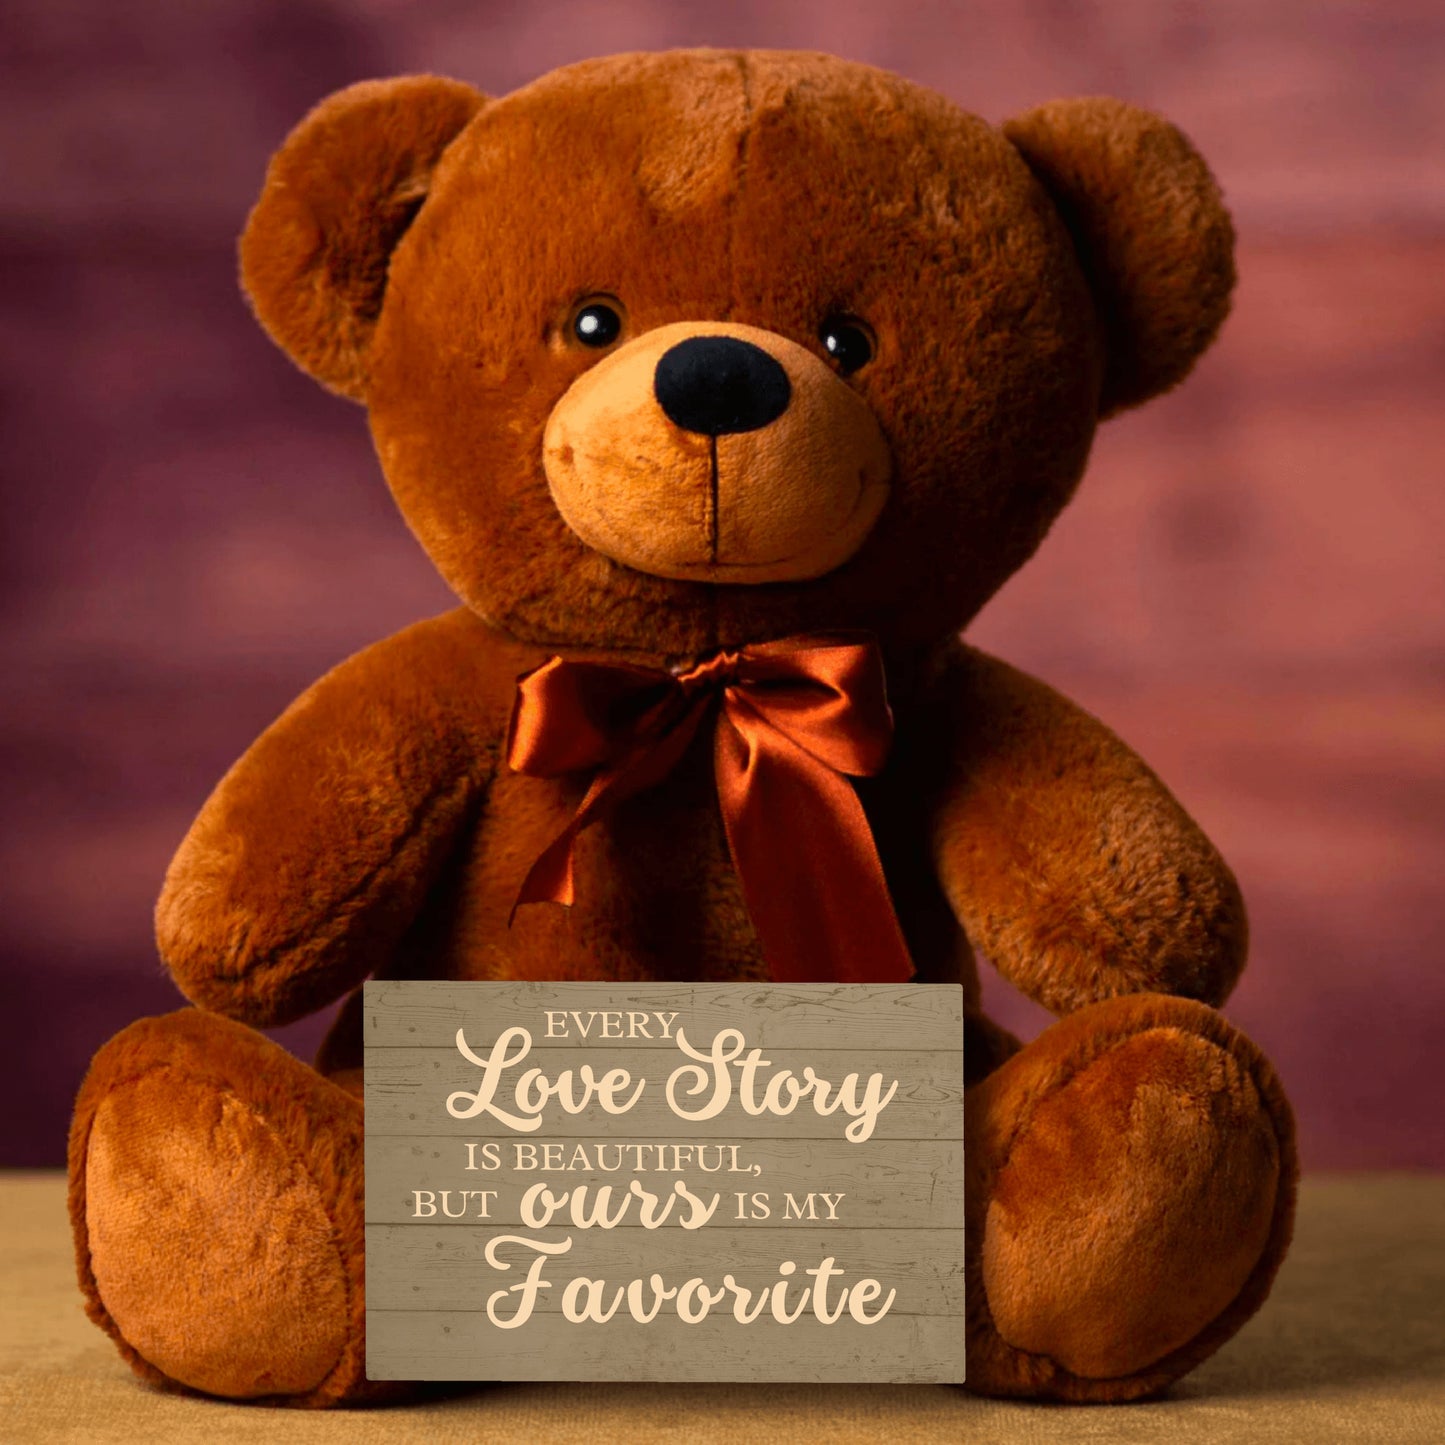 Every love story is beautiful but ours is my favorite Teddy Bear FREE SHIPPING